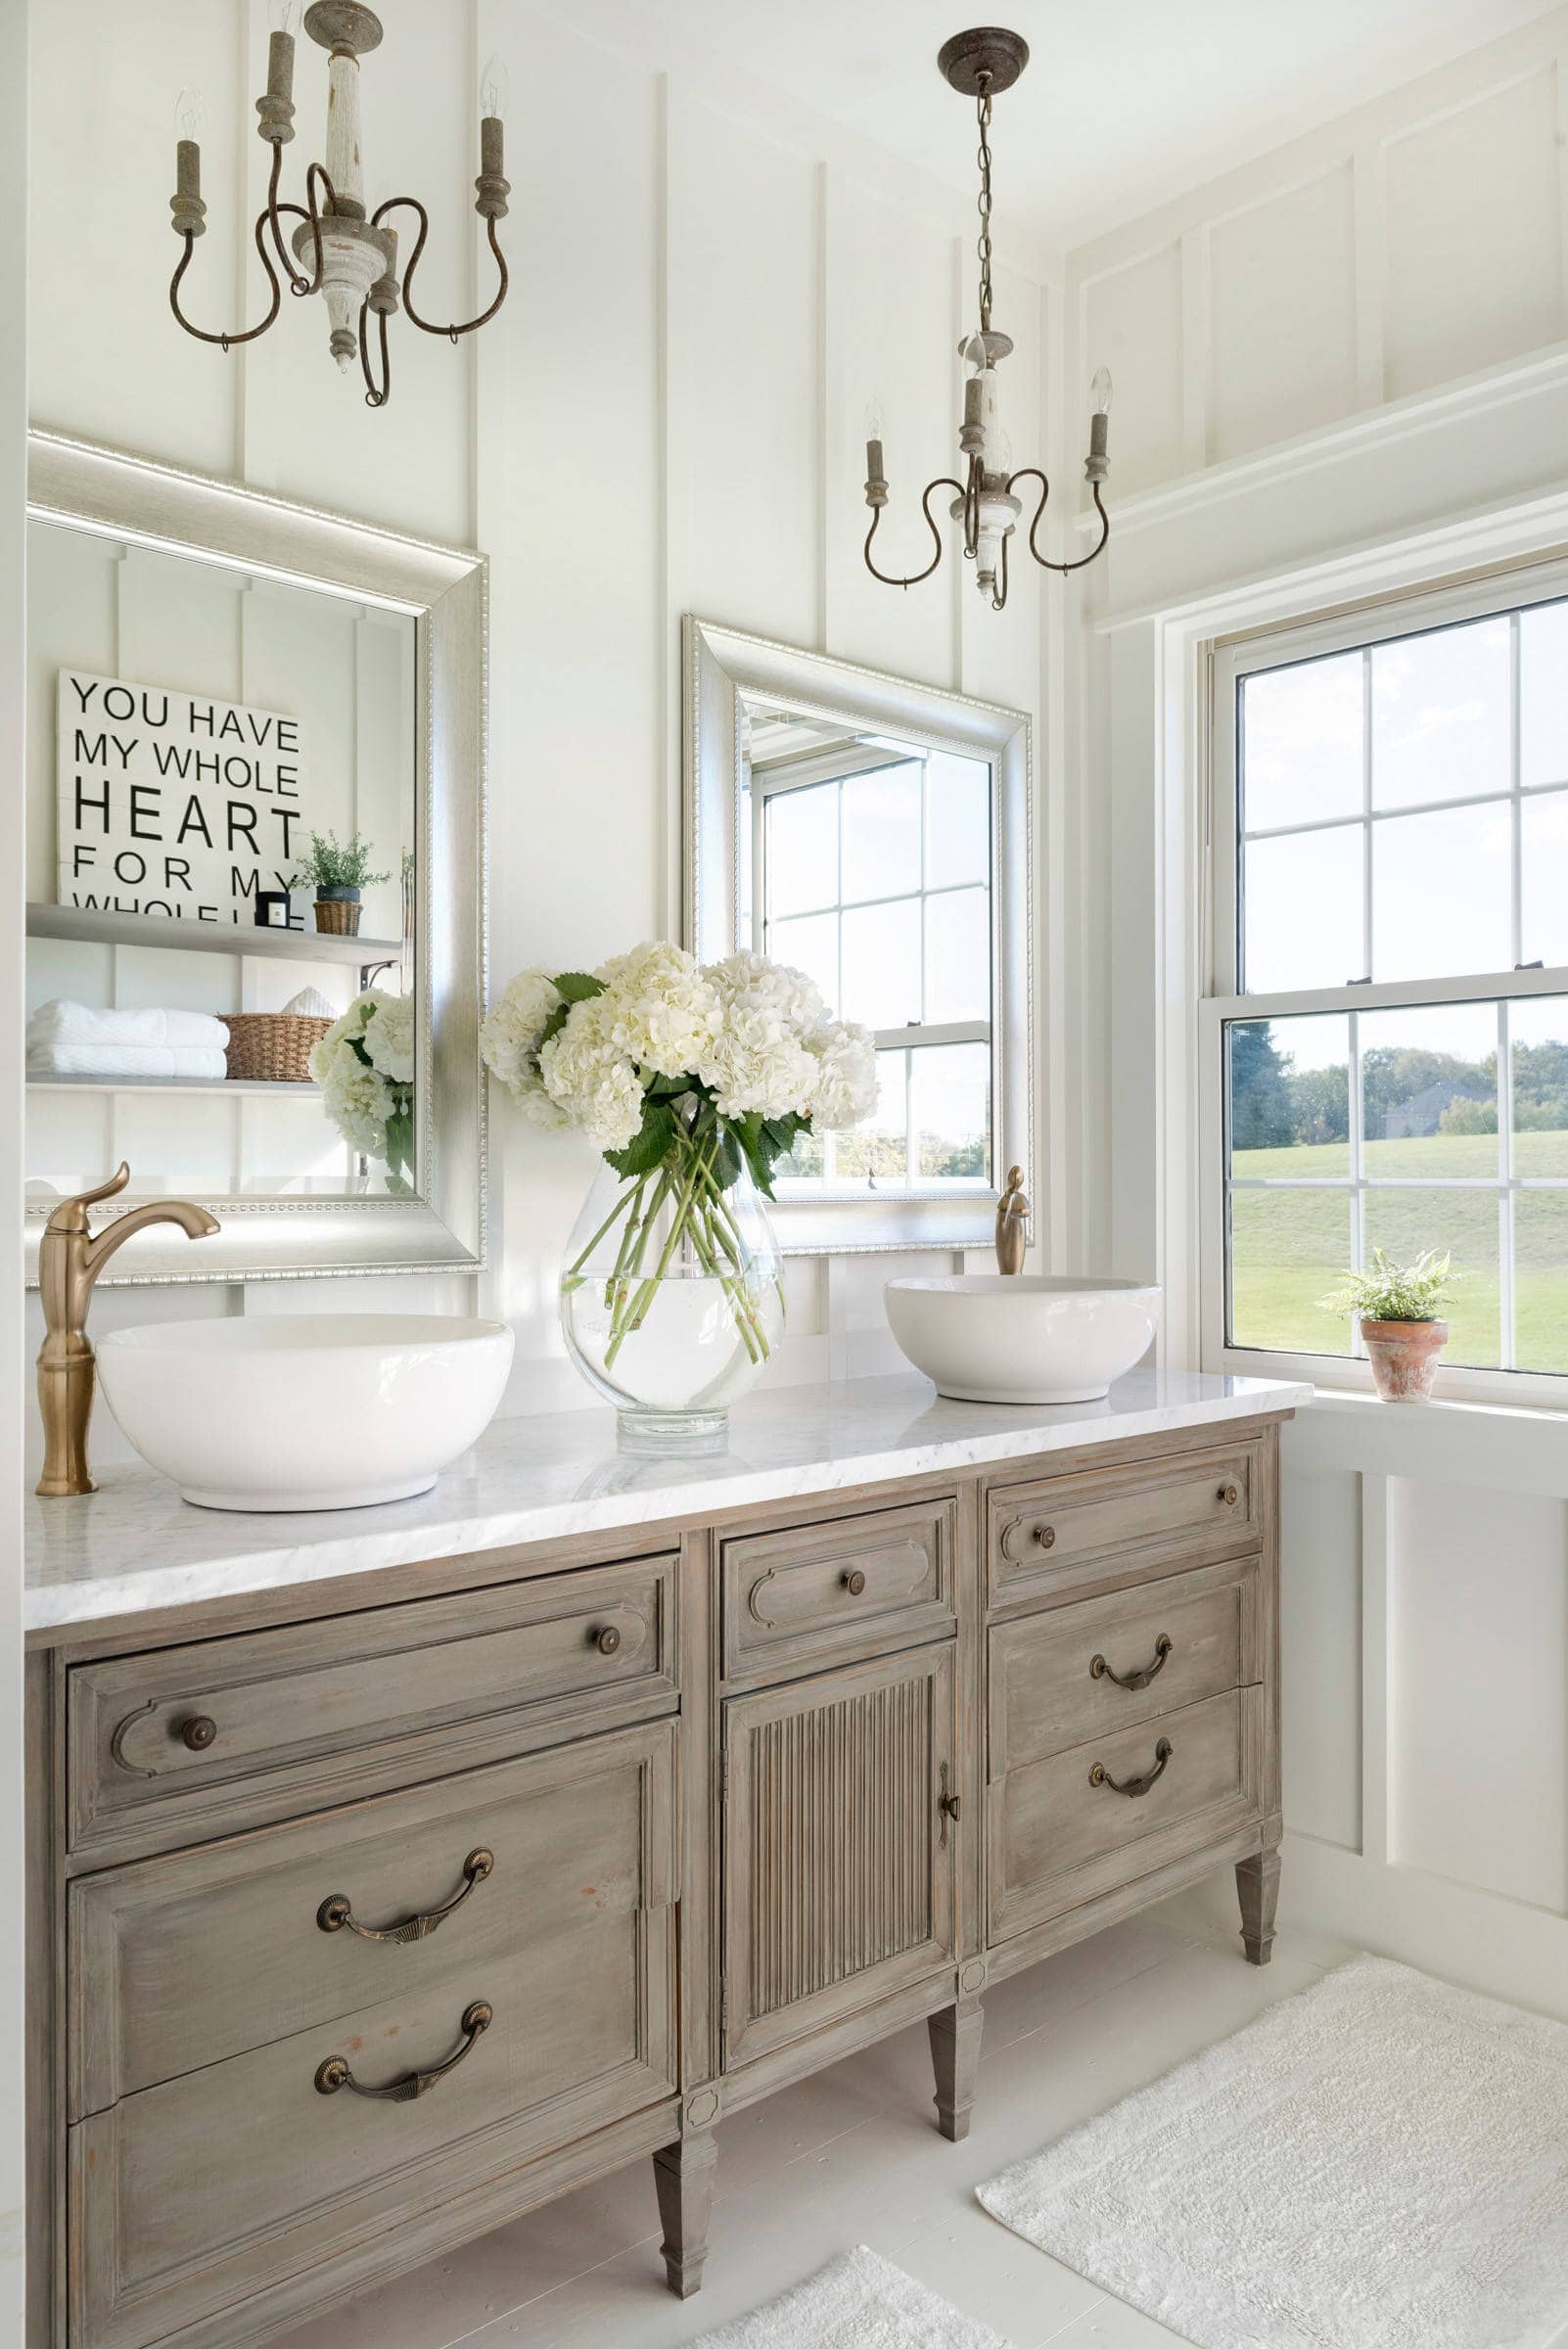 bedroom in a traditional farmhouse style featuring a vintage sink featured in home tour